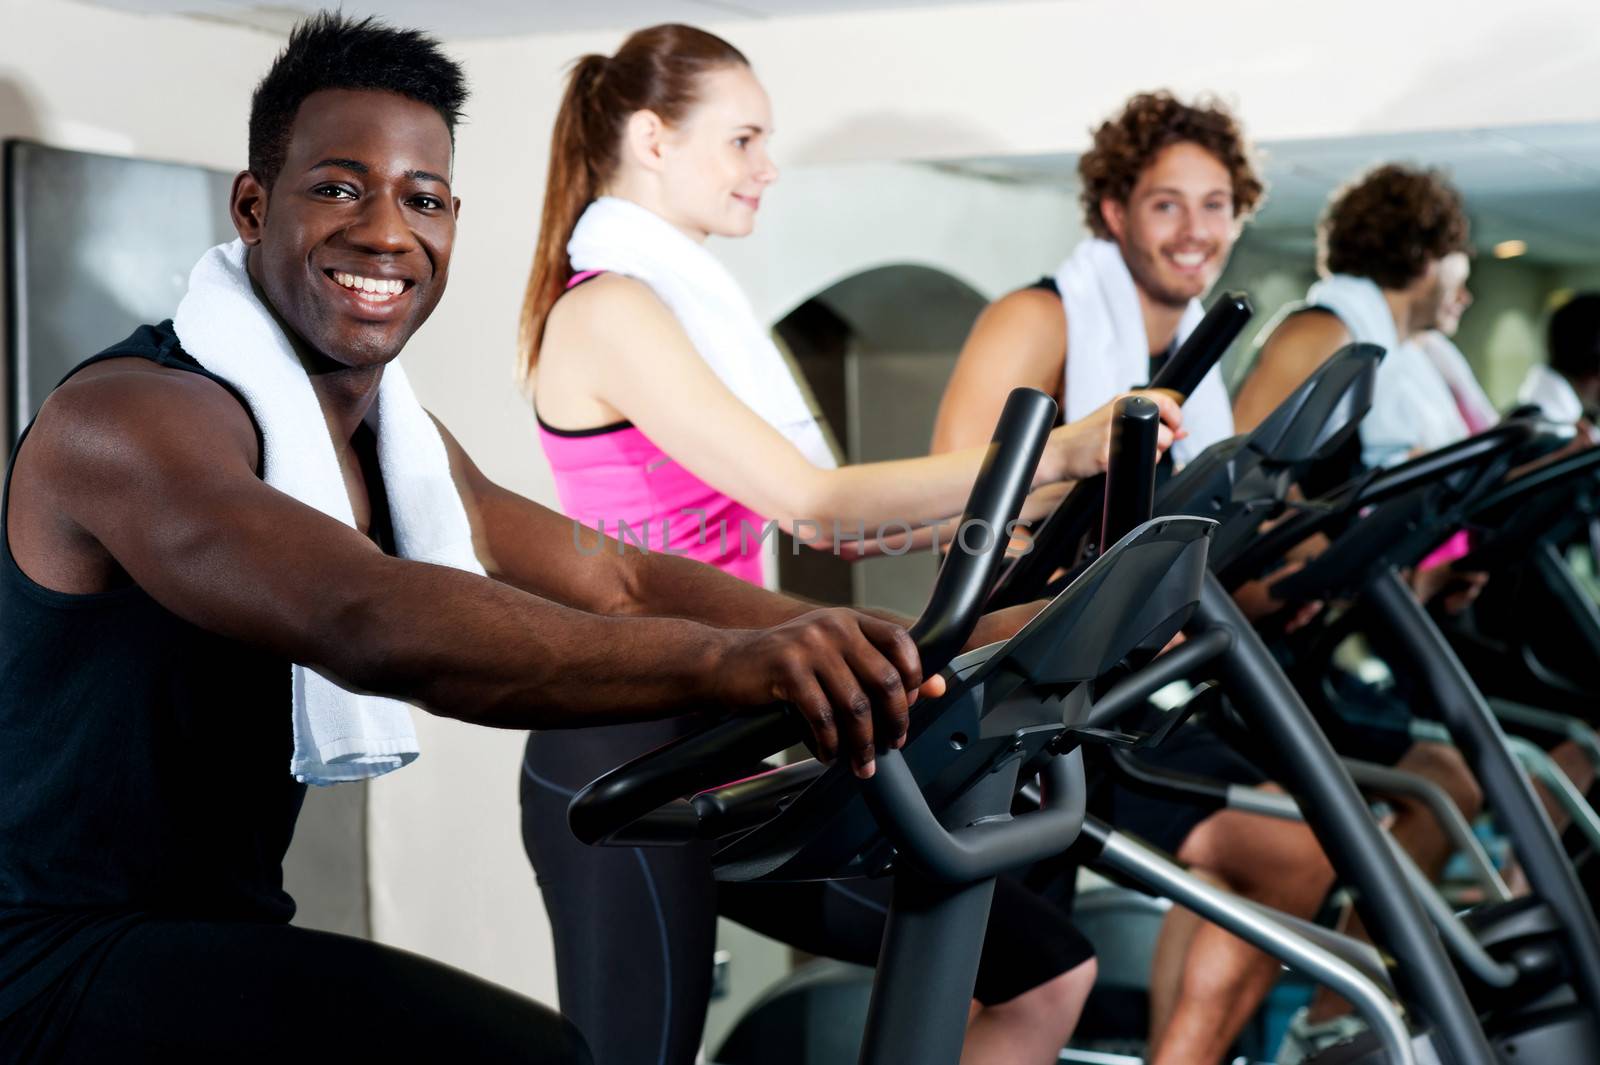 Group of smiling people at the gym doing cardio exercise